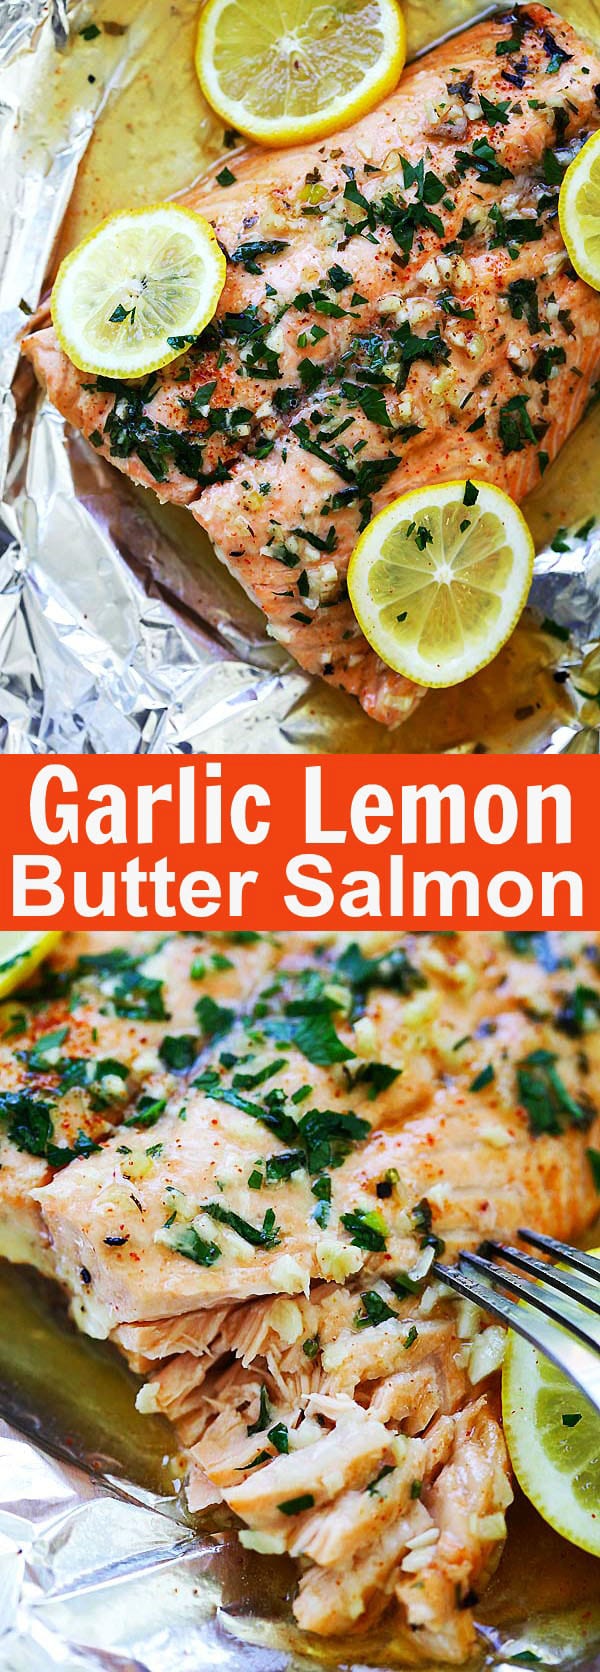 Garlic Lemon Butter Salmon - the easiest foil-wrapped salmon recipe ever with crazy delicious salmon in garlic lemon butter sauce. So good | rasamalaysia.com